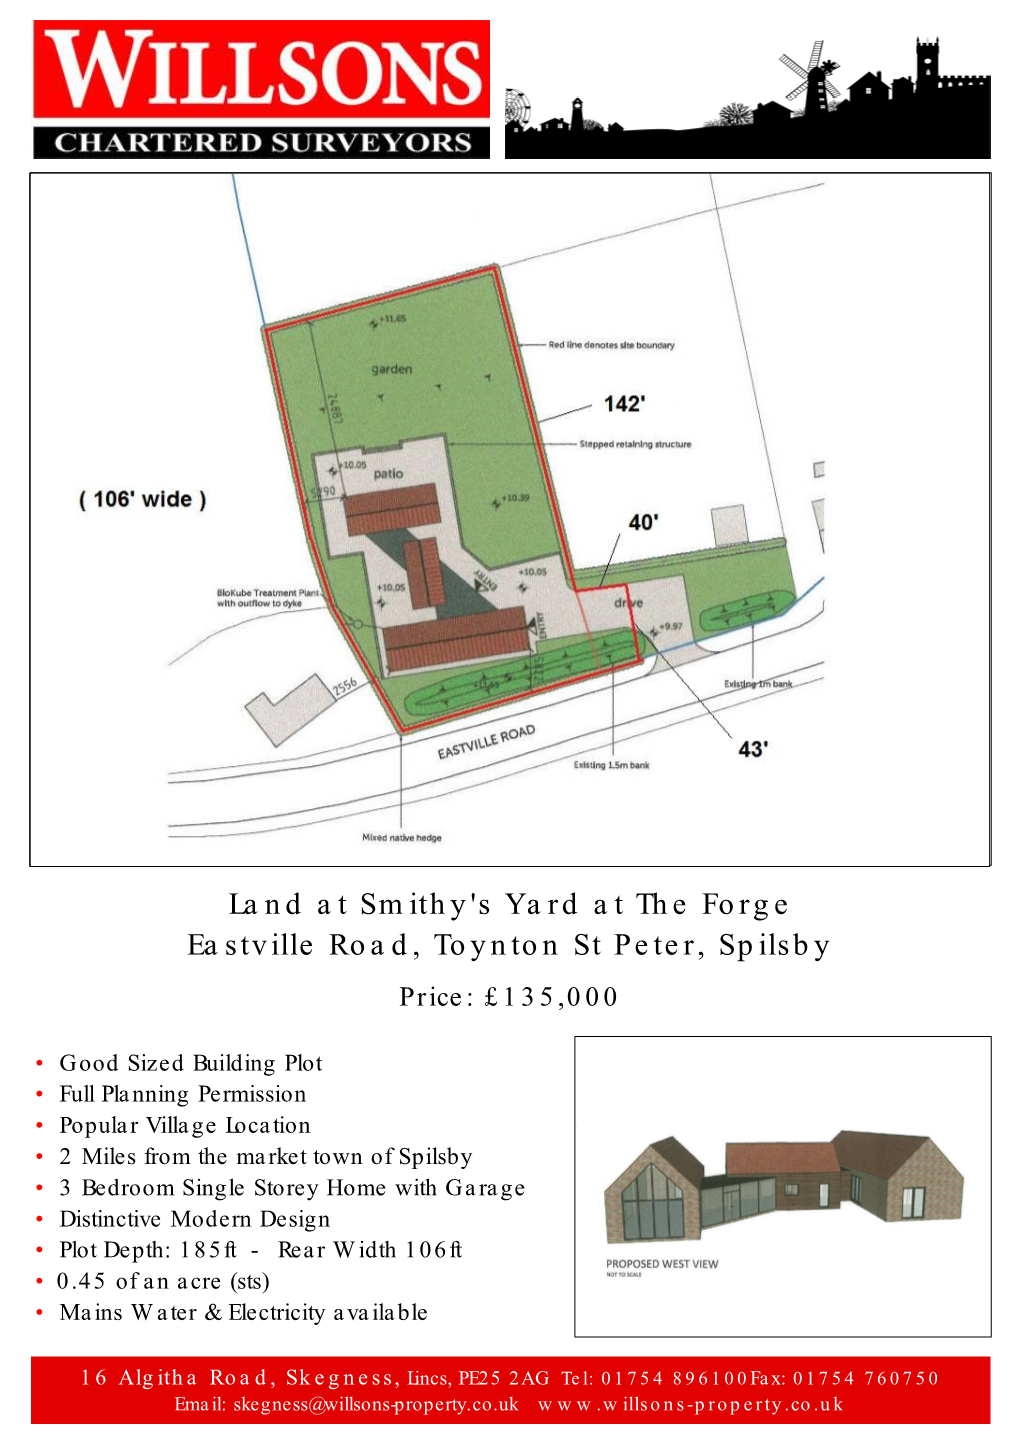 Land at Smithy's Yard at the Forge Eastville Road, Toynton St Peter